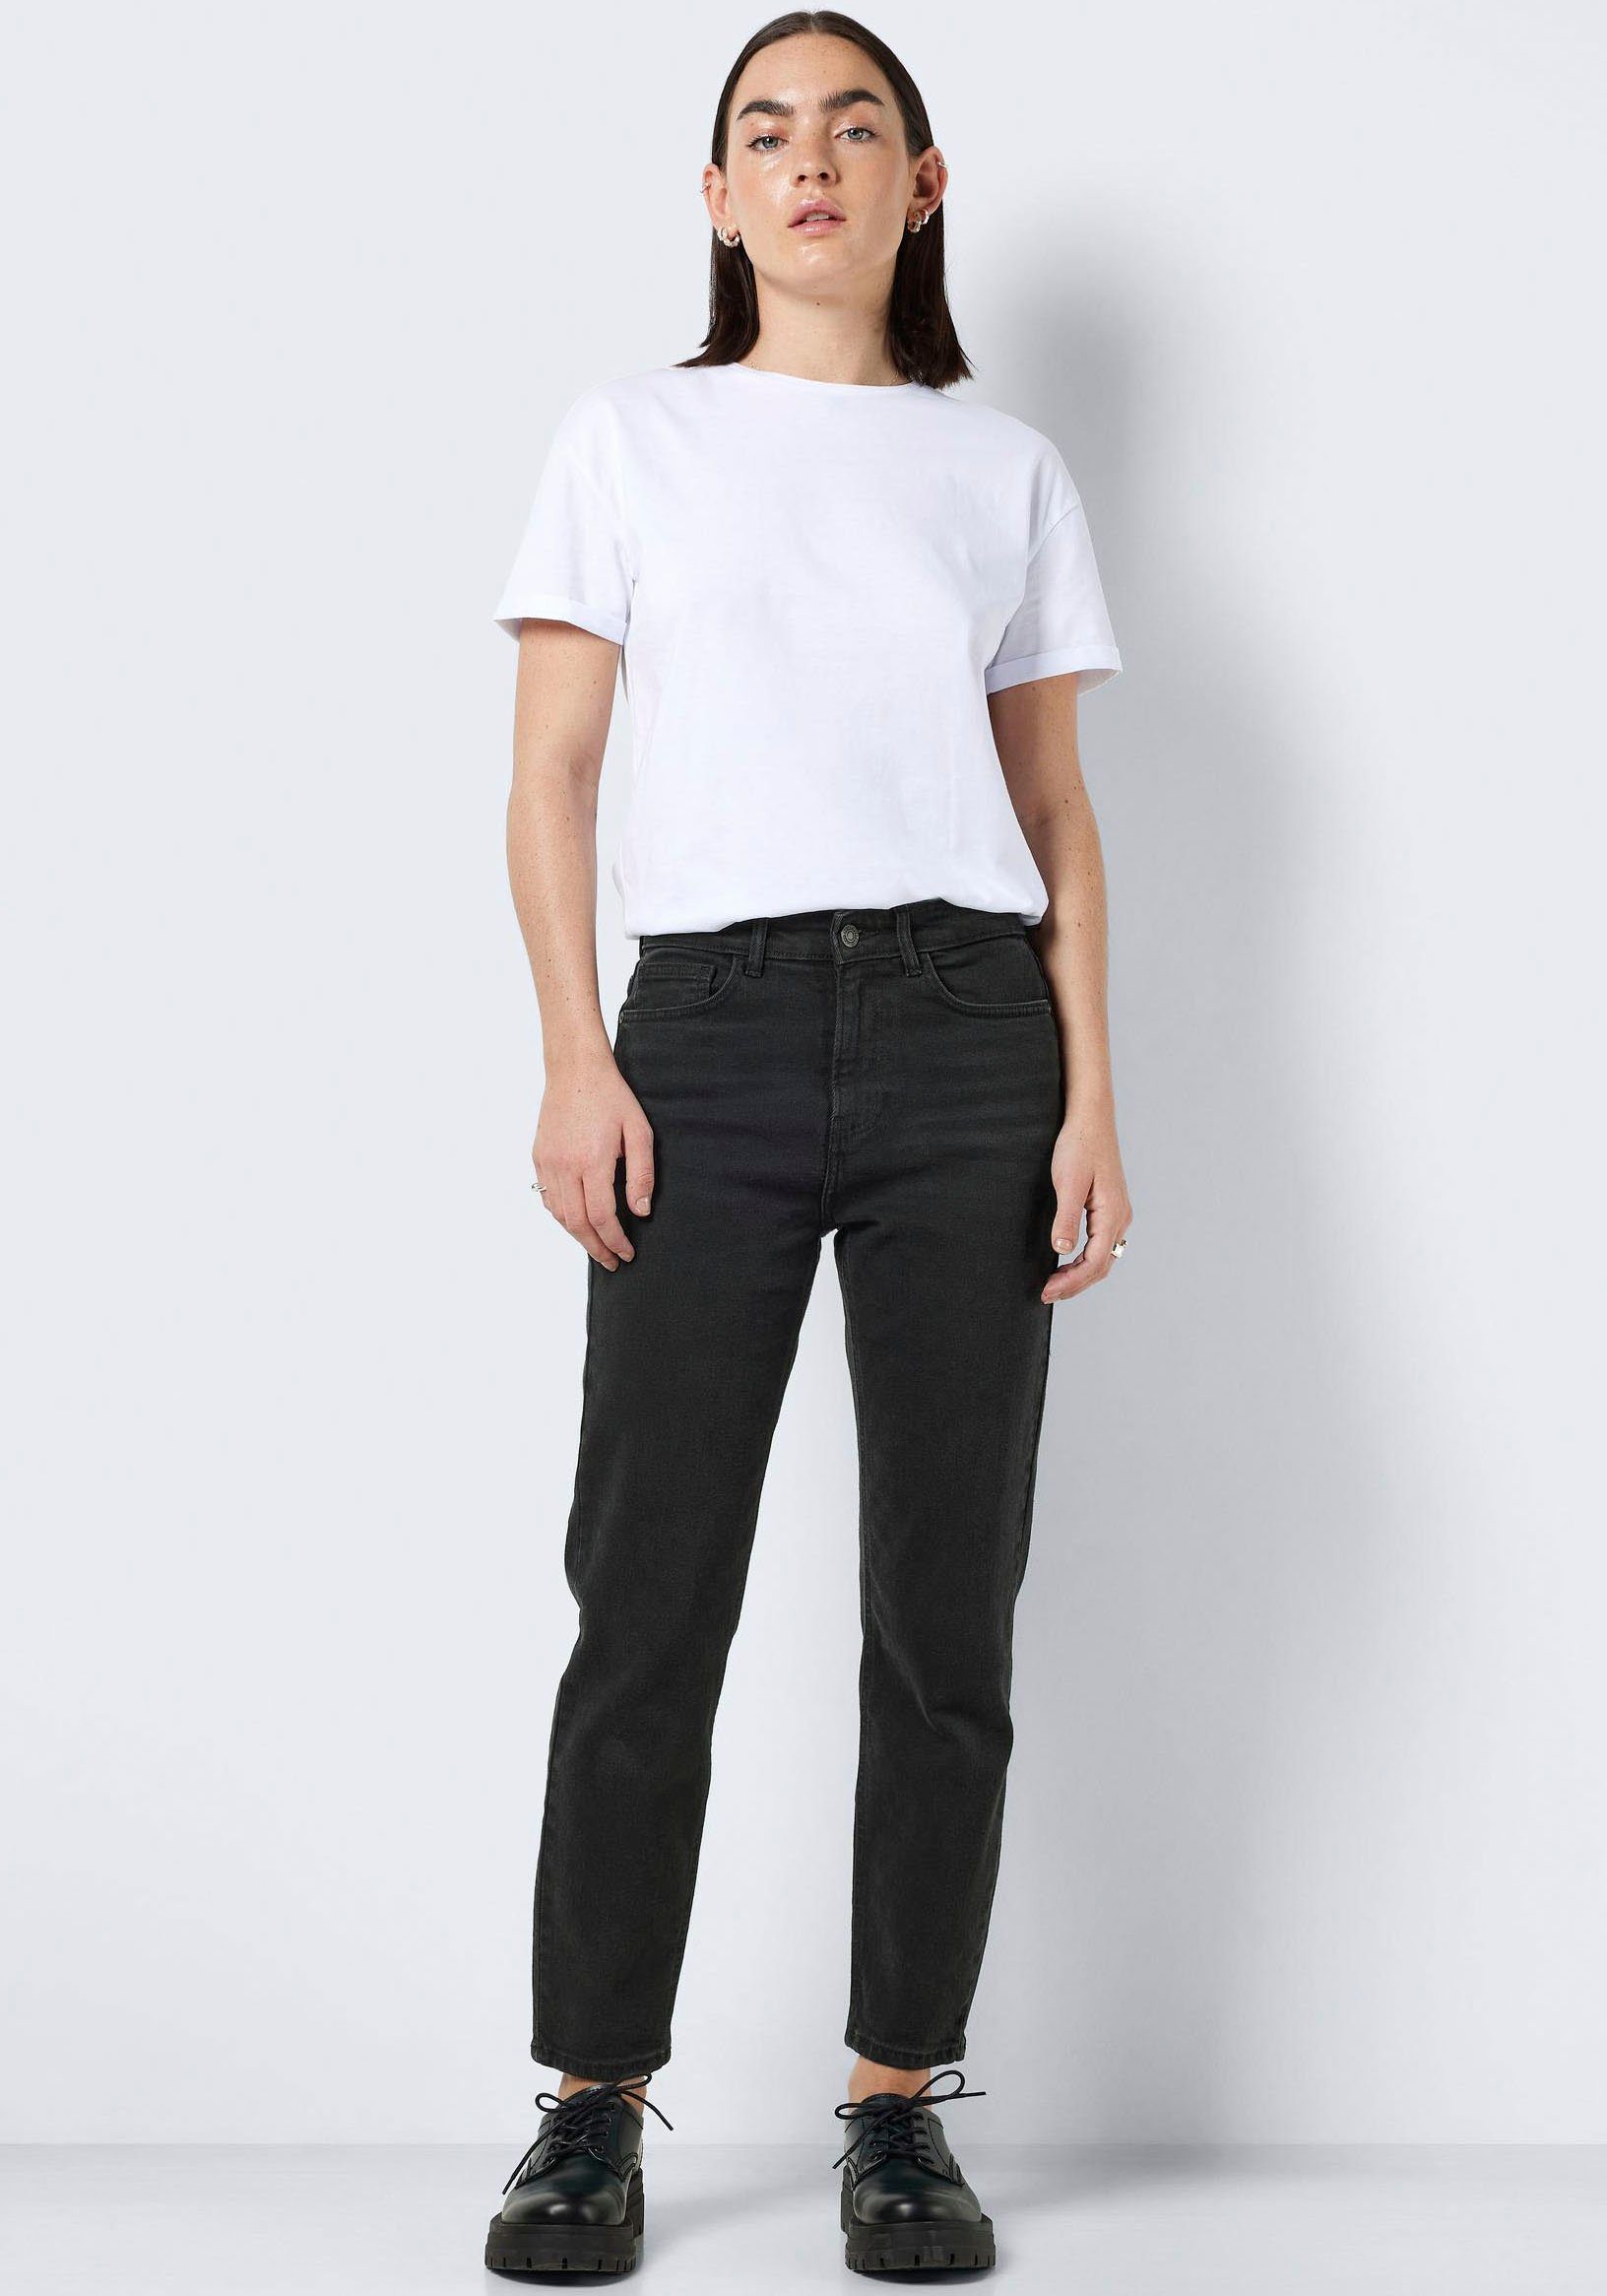 HW may mit ANK Saum Noisy offenem BLACK NOOS NMMONI Straight-Jeans STRAIGHT JEANS